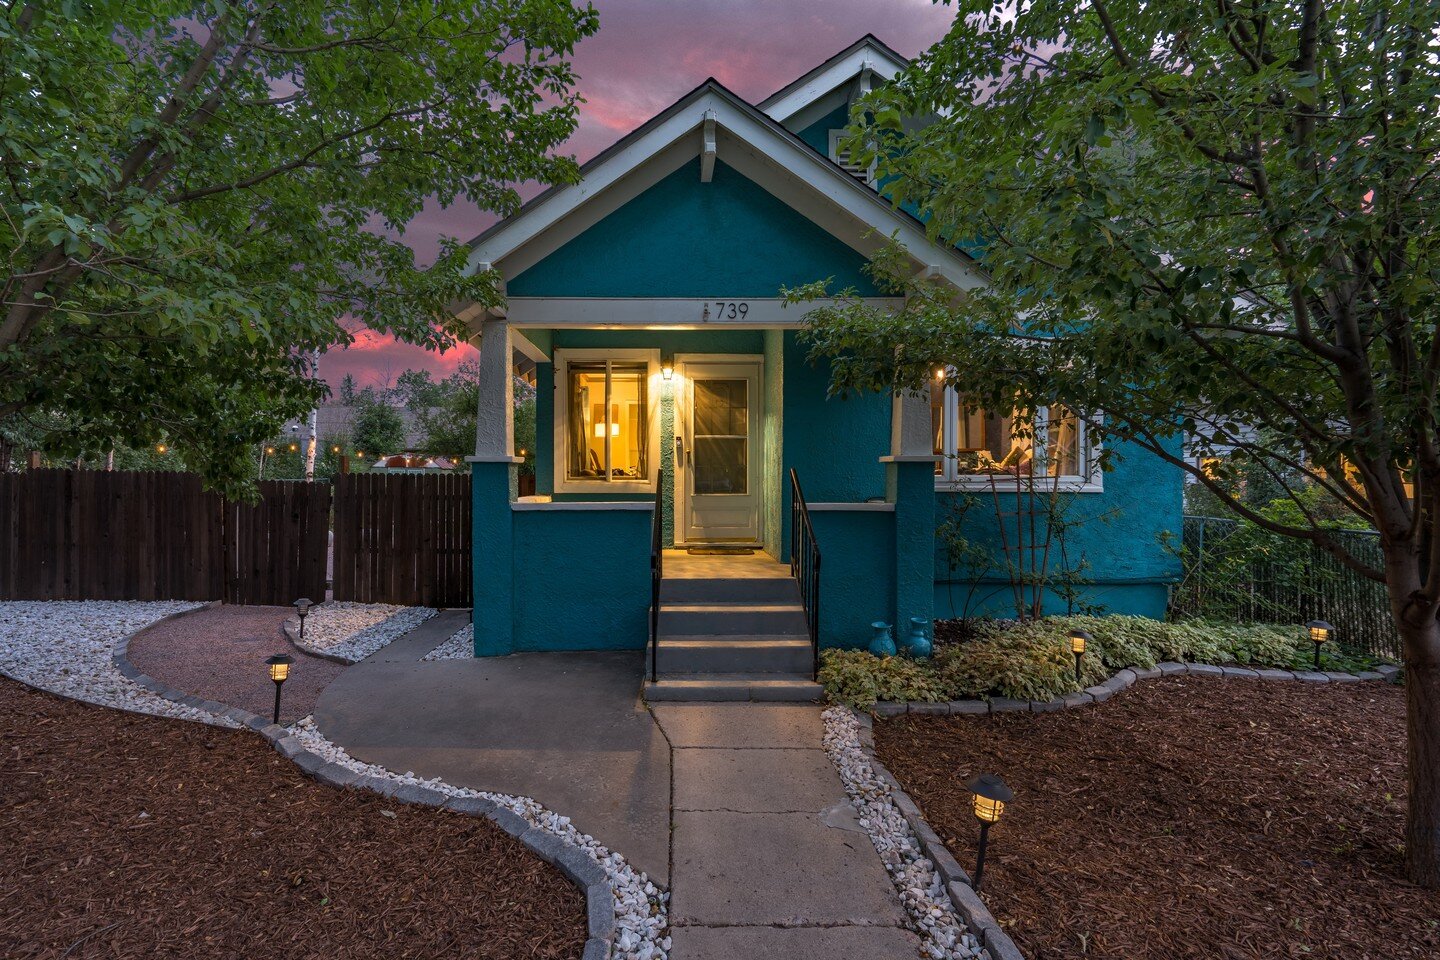 ᴛᴡɪʟɪɢʜᴛ ᴘʜᴏᴛᴏɢʀᴀᴘʜʏ

Give your listing a premium feel with REAL #twilight photos. Not only will you stand out against the competition, but twilight photos highlight details of the home that you typically can't see in the daytime, creating a welcomin